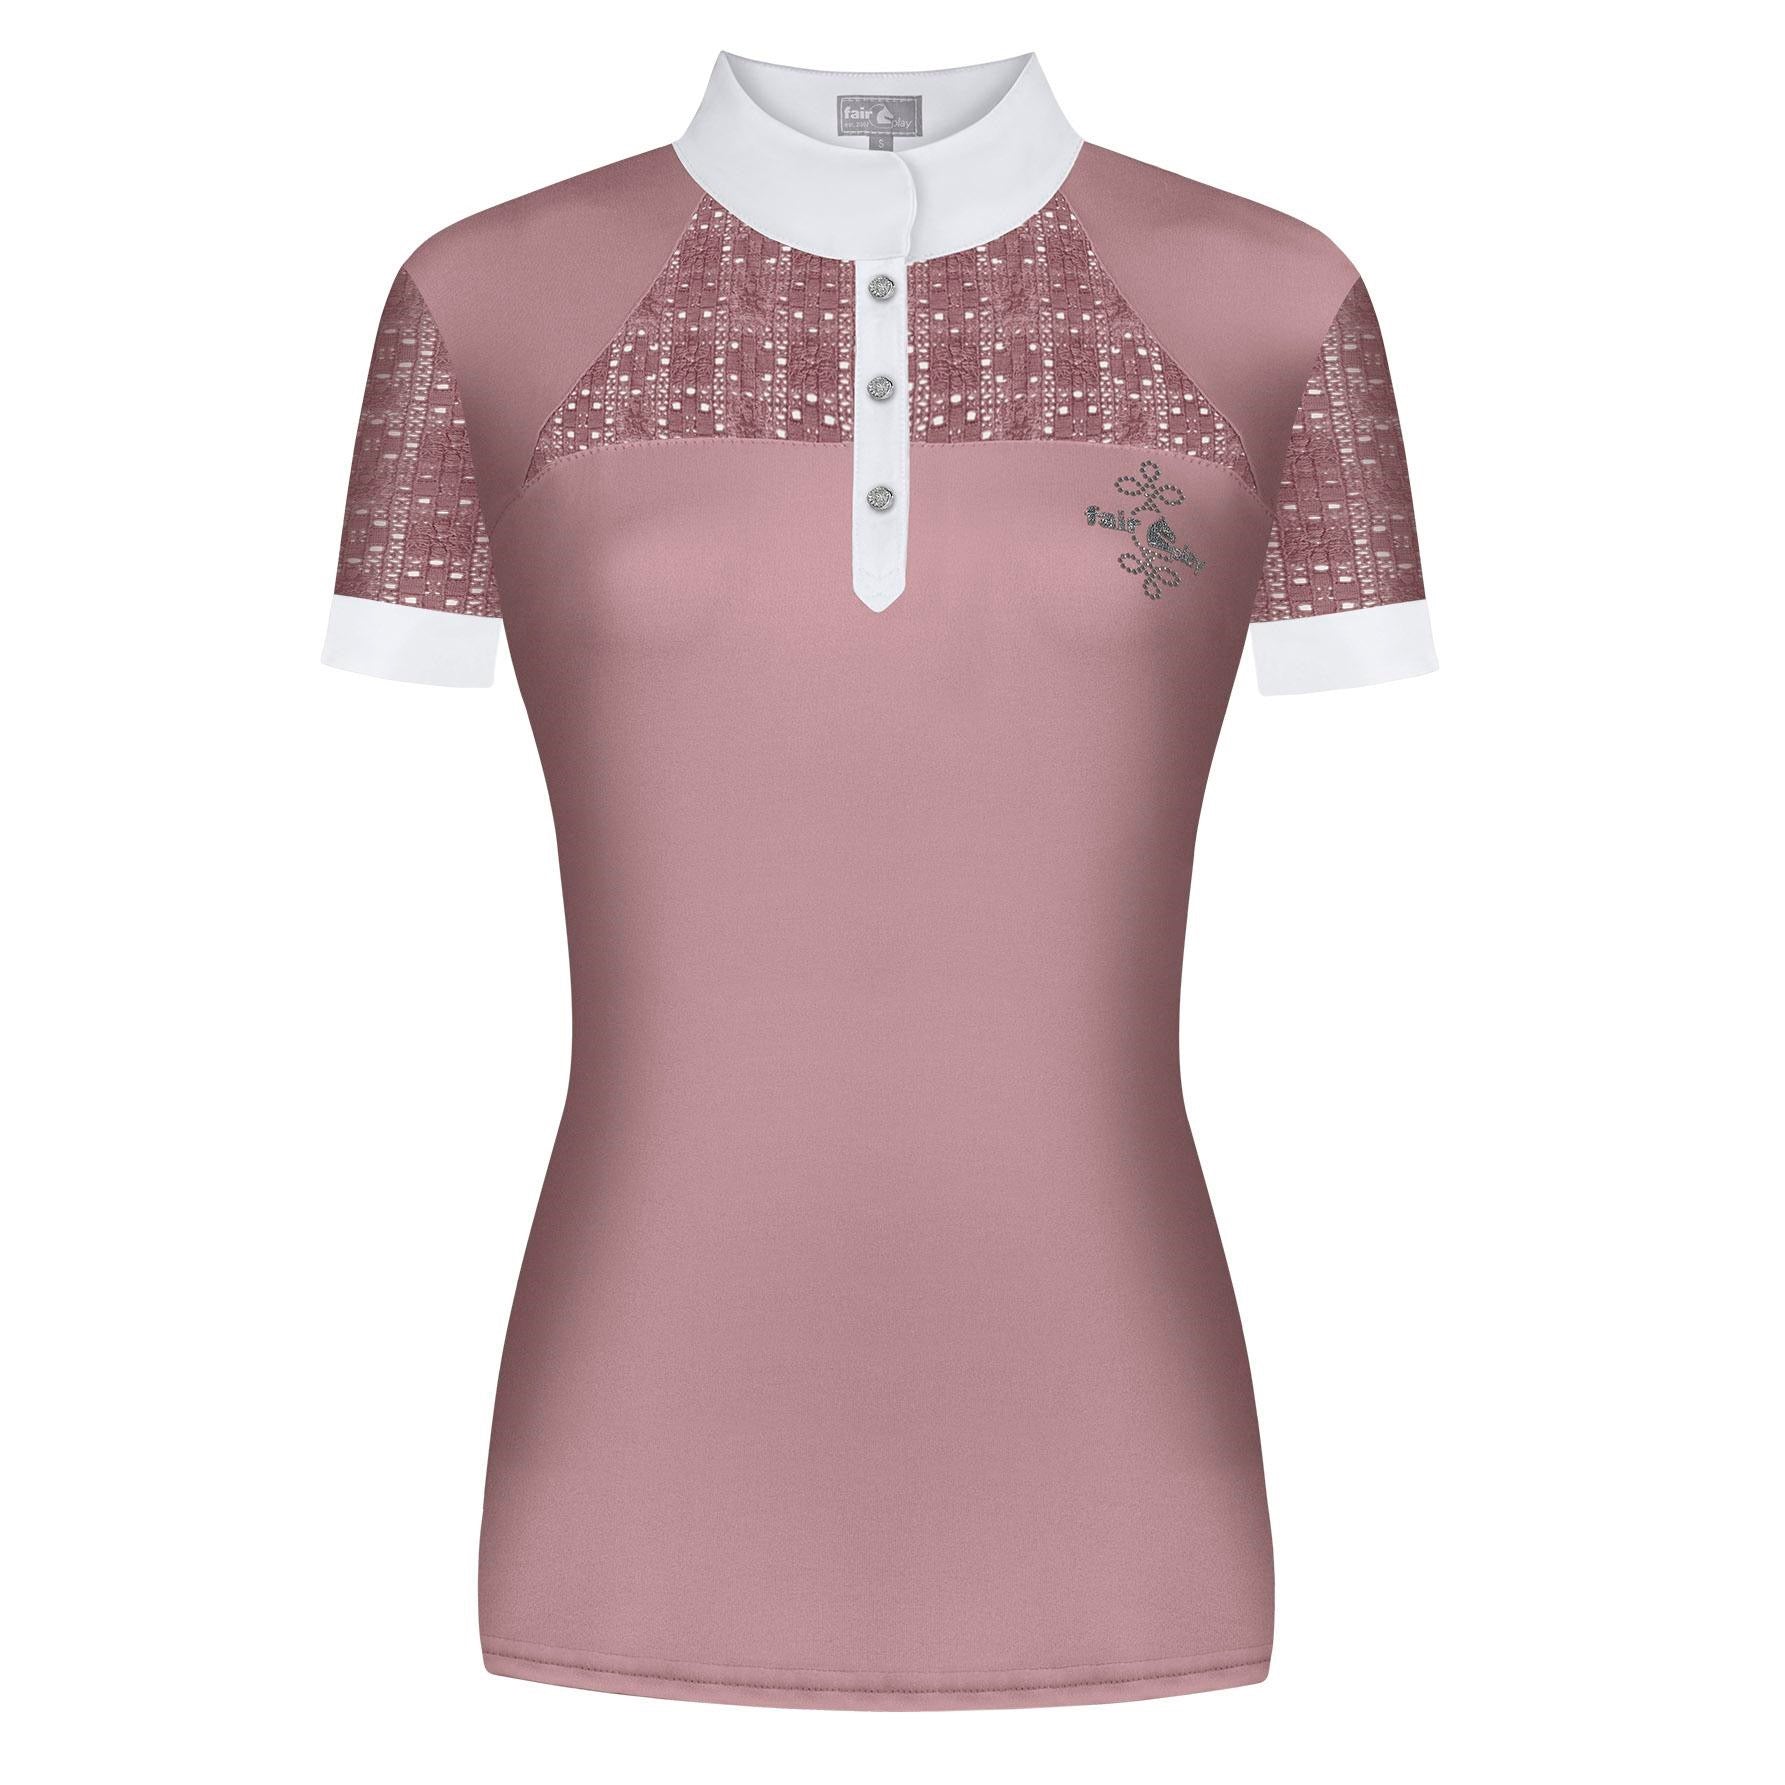 Fair Play AIKO Short Sleeve Competition Shirt, Dusty Pink